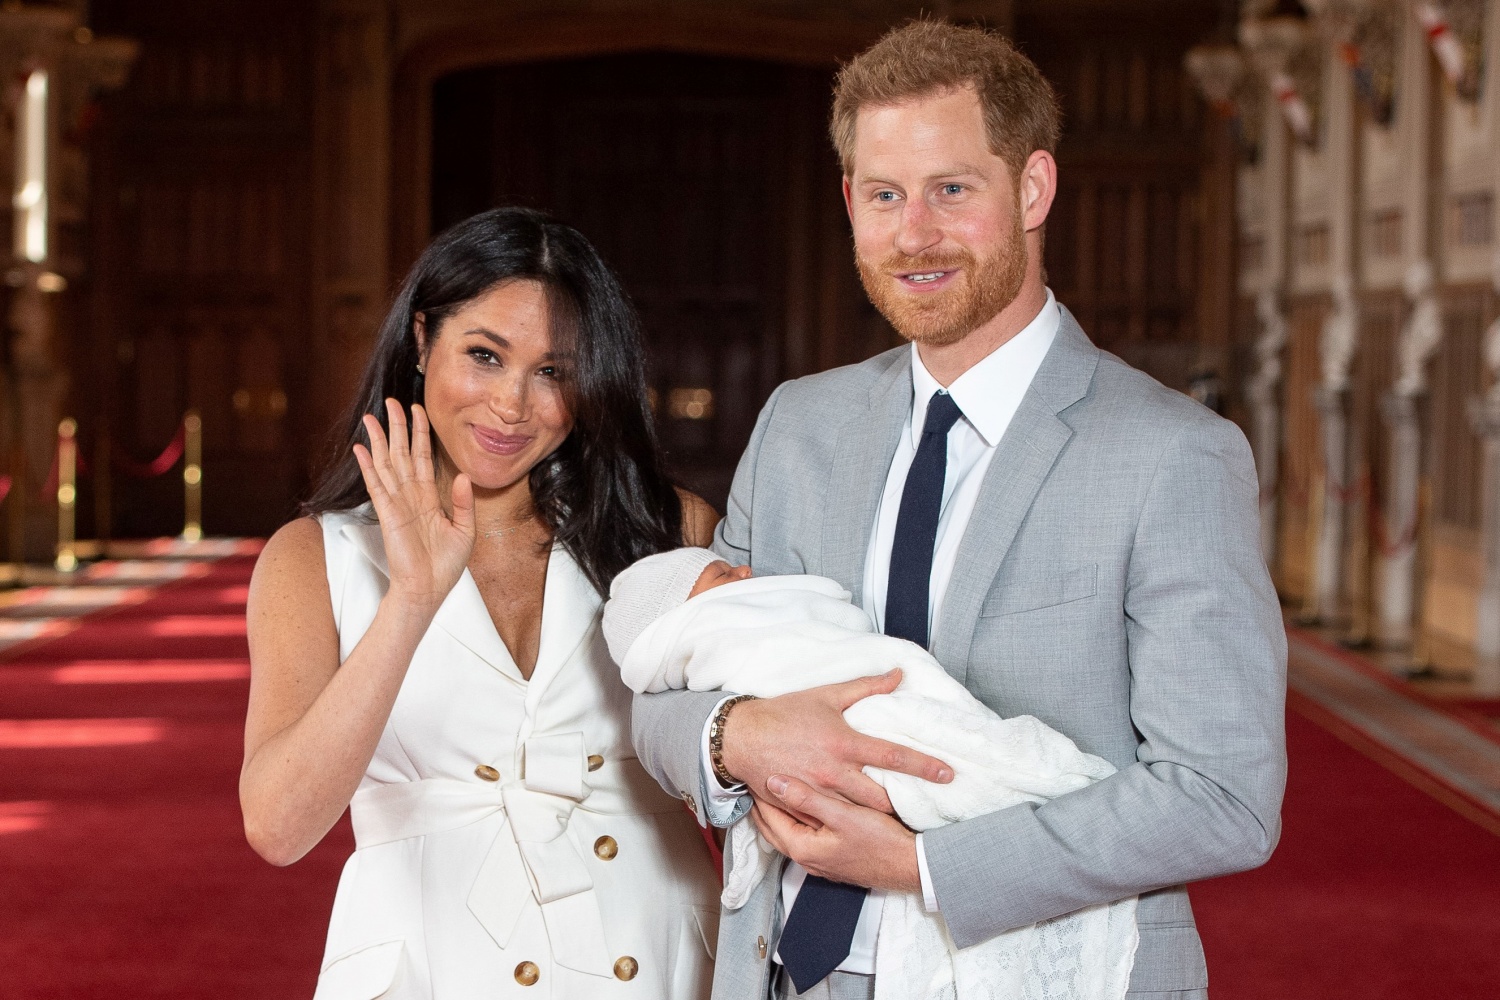 Prince Harry, Duke of Sussex, Meghan Markle, Duchess of Sussex